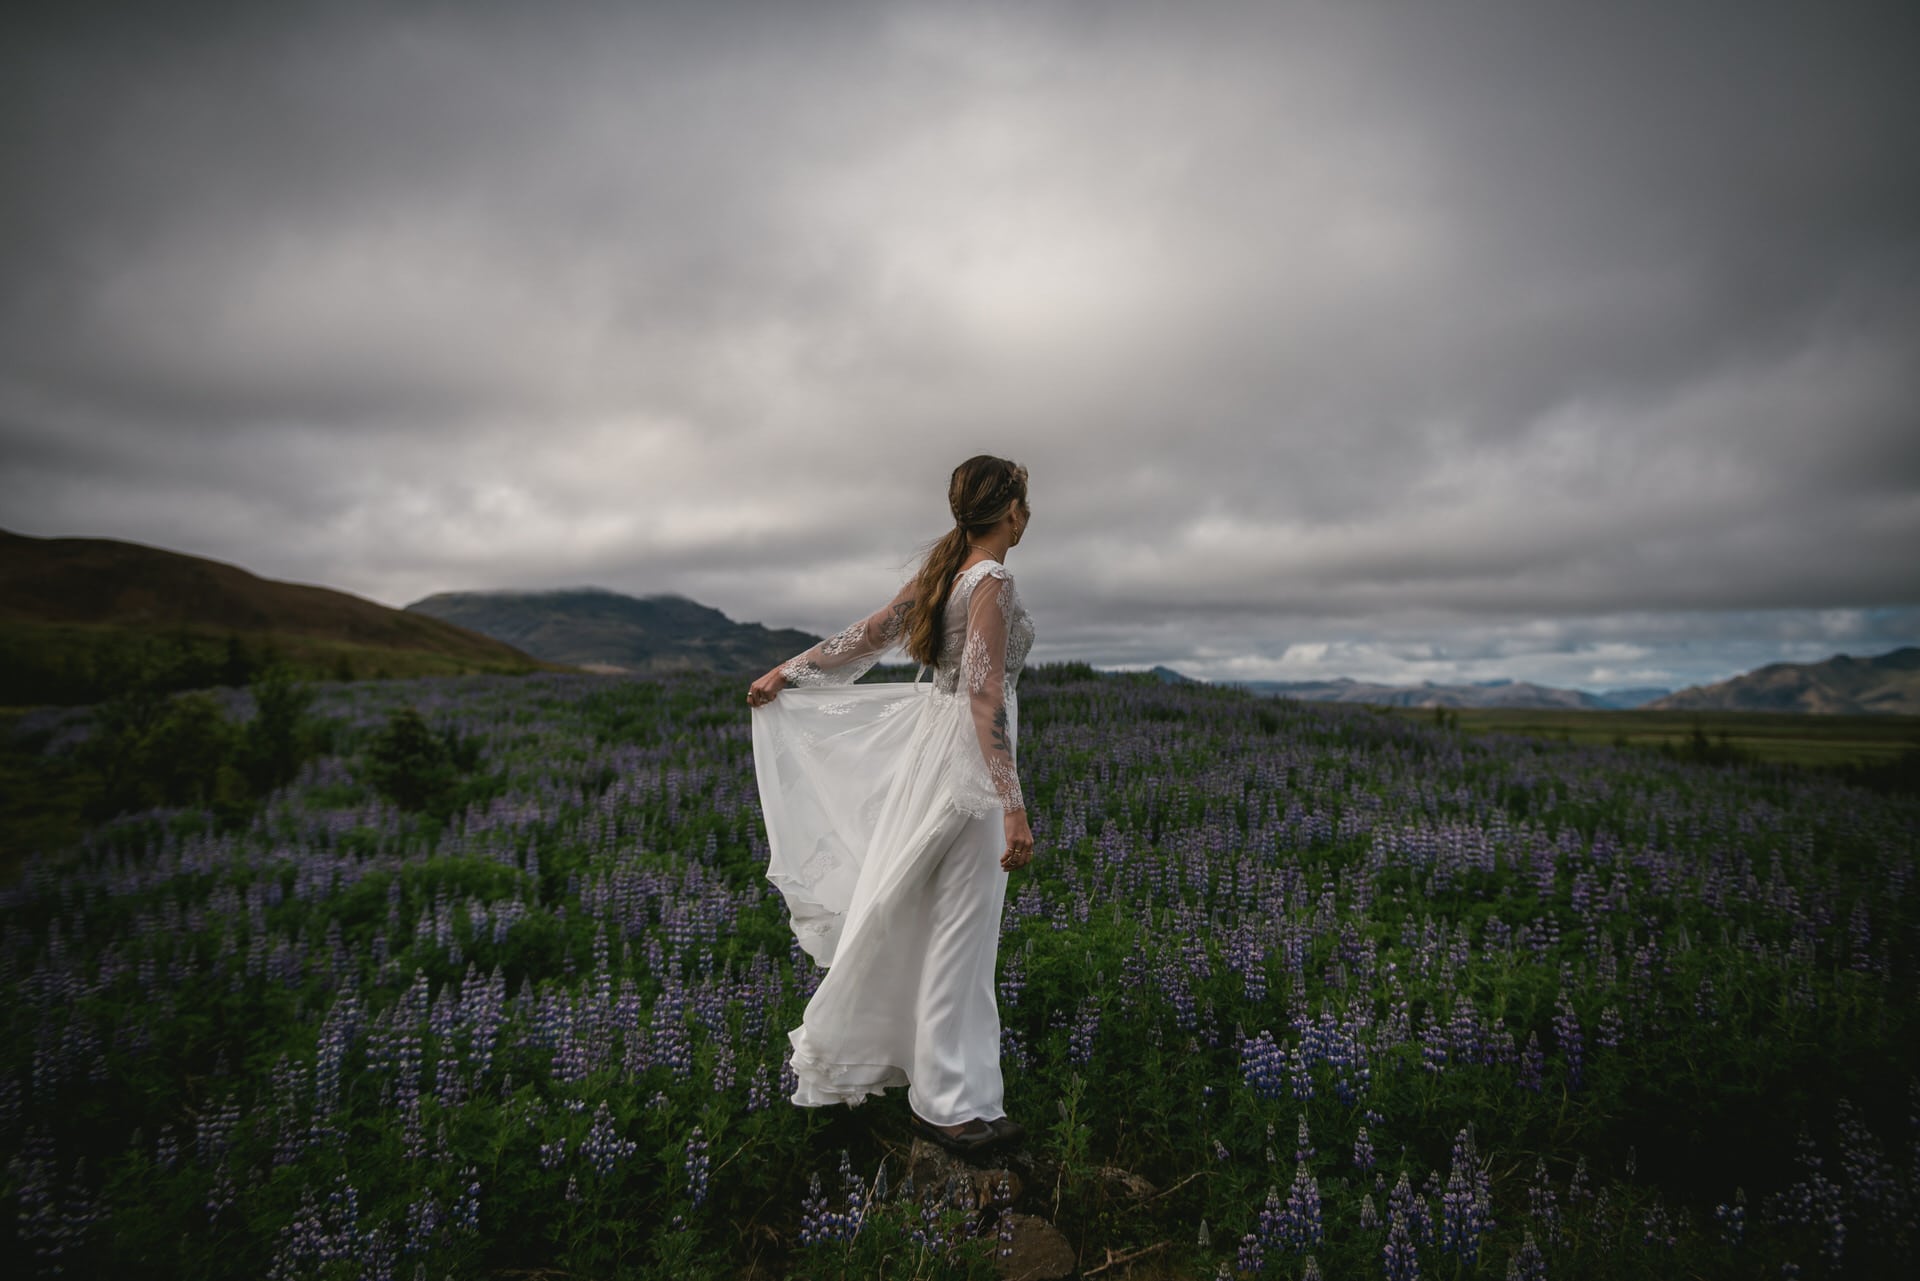 Dramatic shot of the bride's dress billowing in the wind against a dramatic Icelandic landscape.